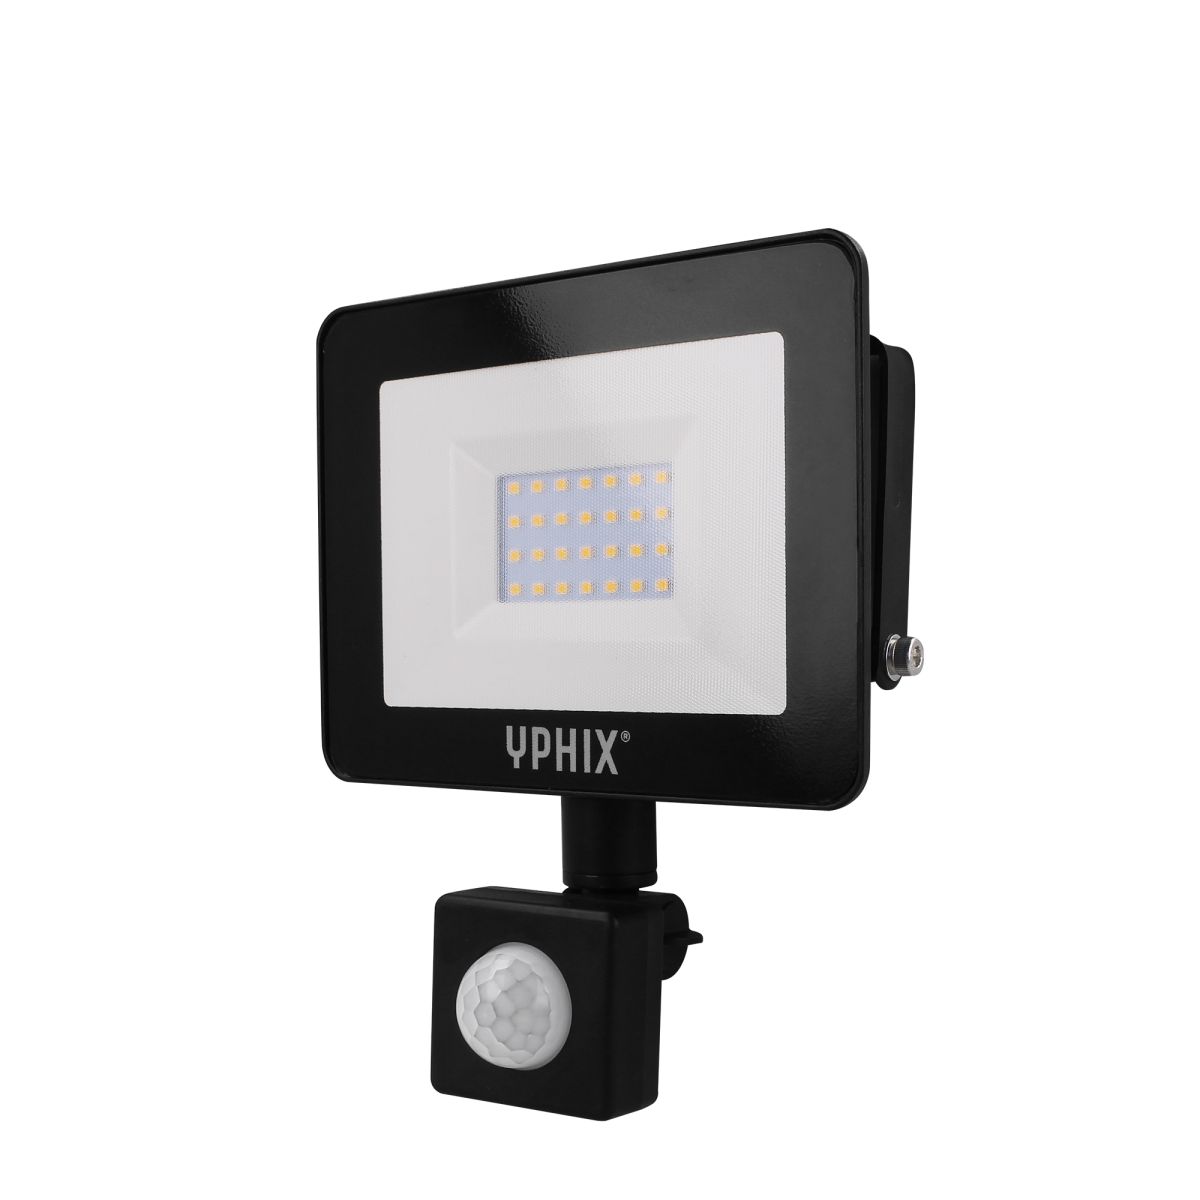 Yphix LED WIGHTRAAL WITH MOTION DEPLE PRO 10W 3000K IP44